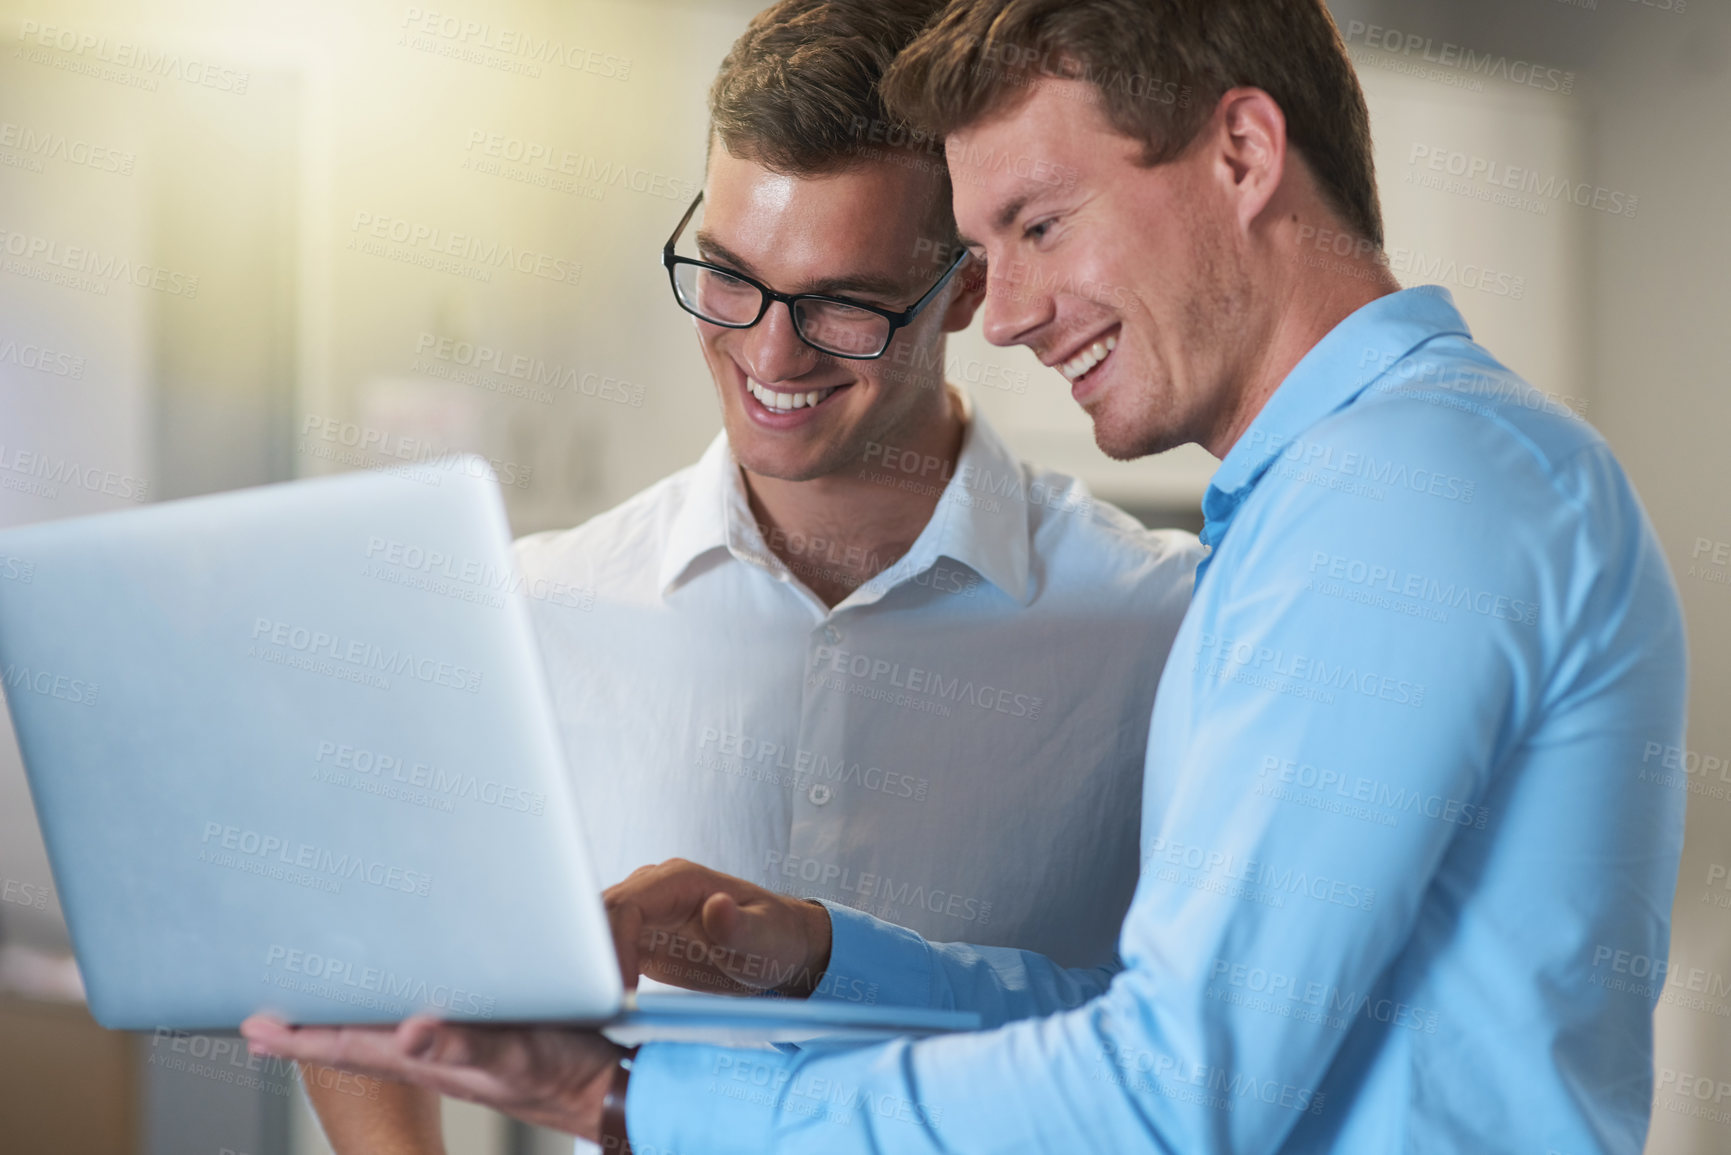 Buy stock photo Shot of two handsome young businessmen working on a laptop together at work